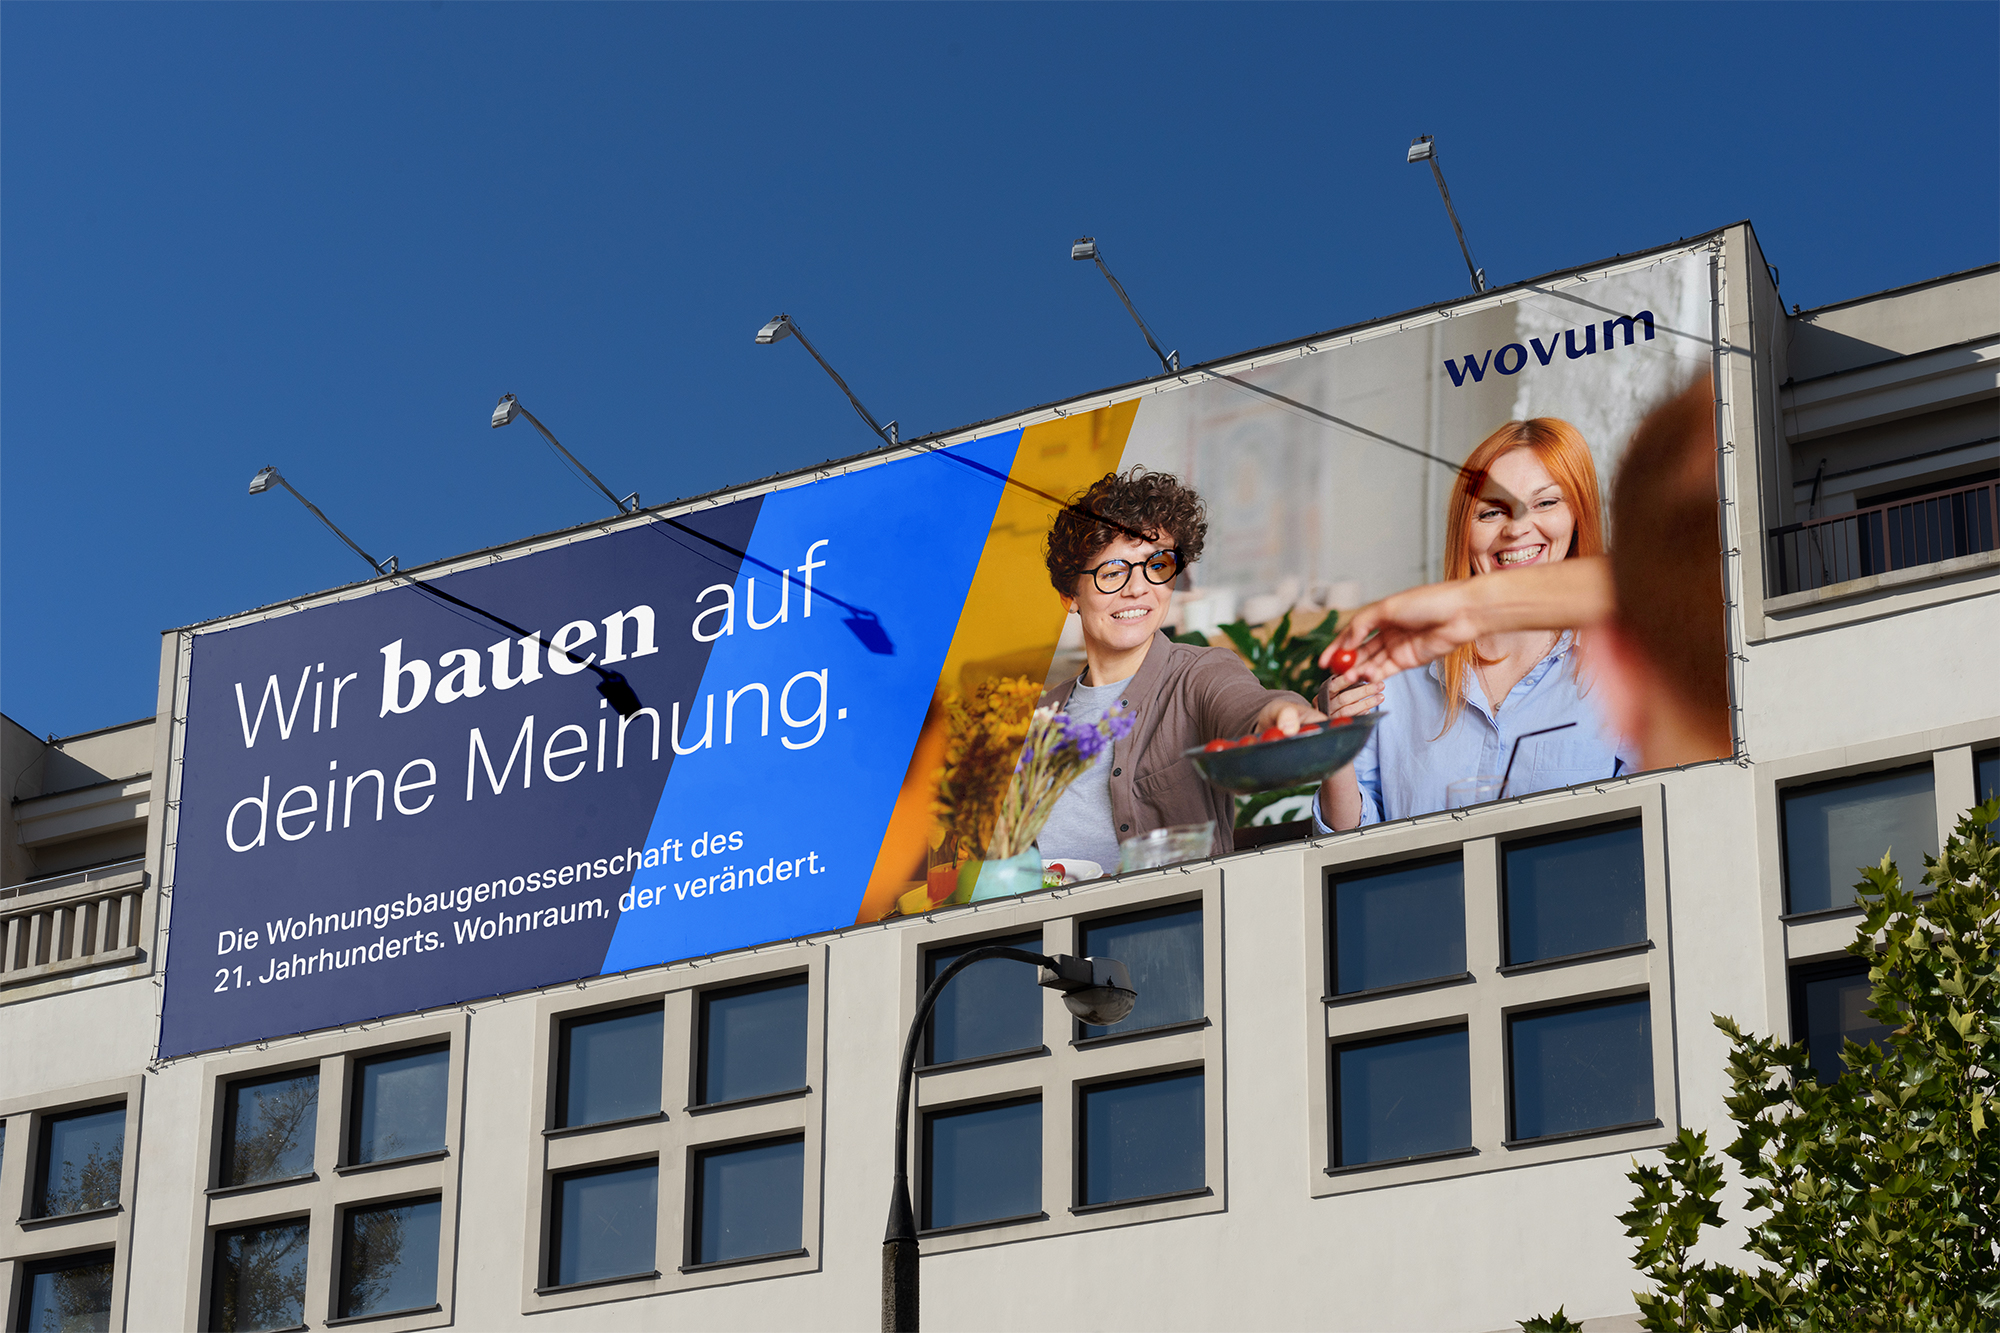 The image shows a photograph of a large wovum billboard in an urban setting.